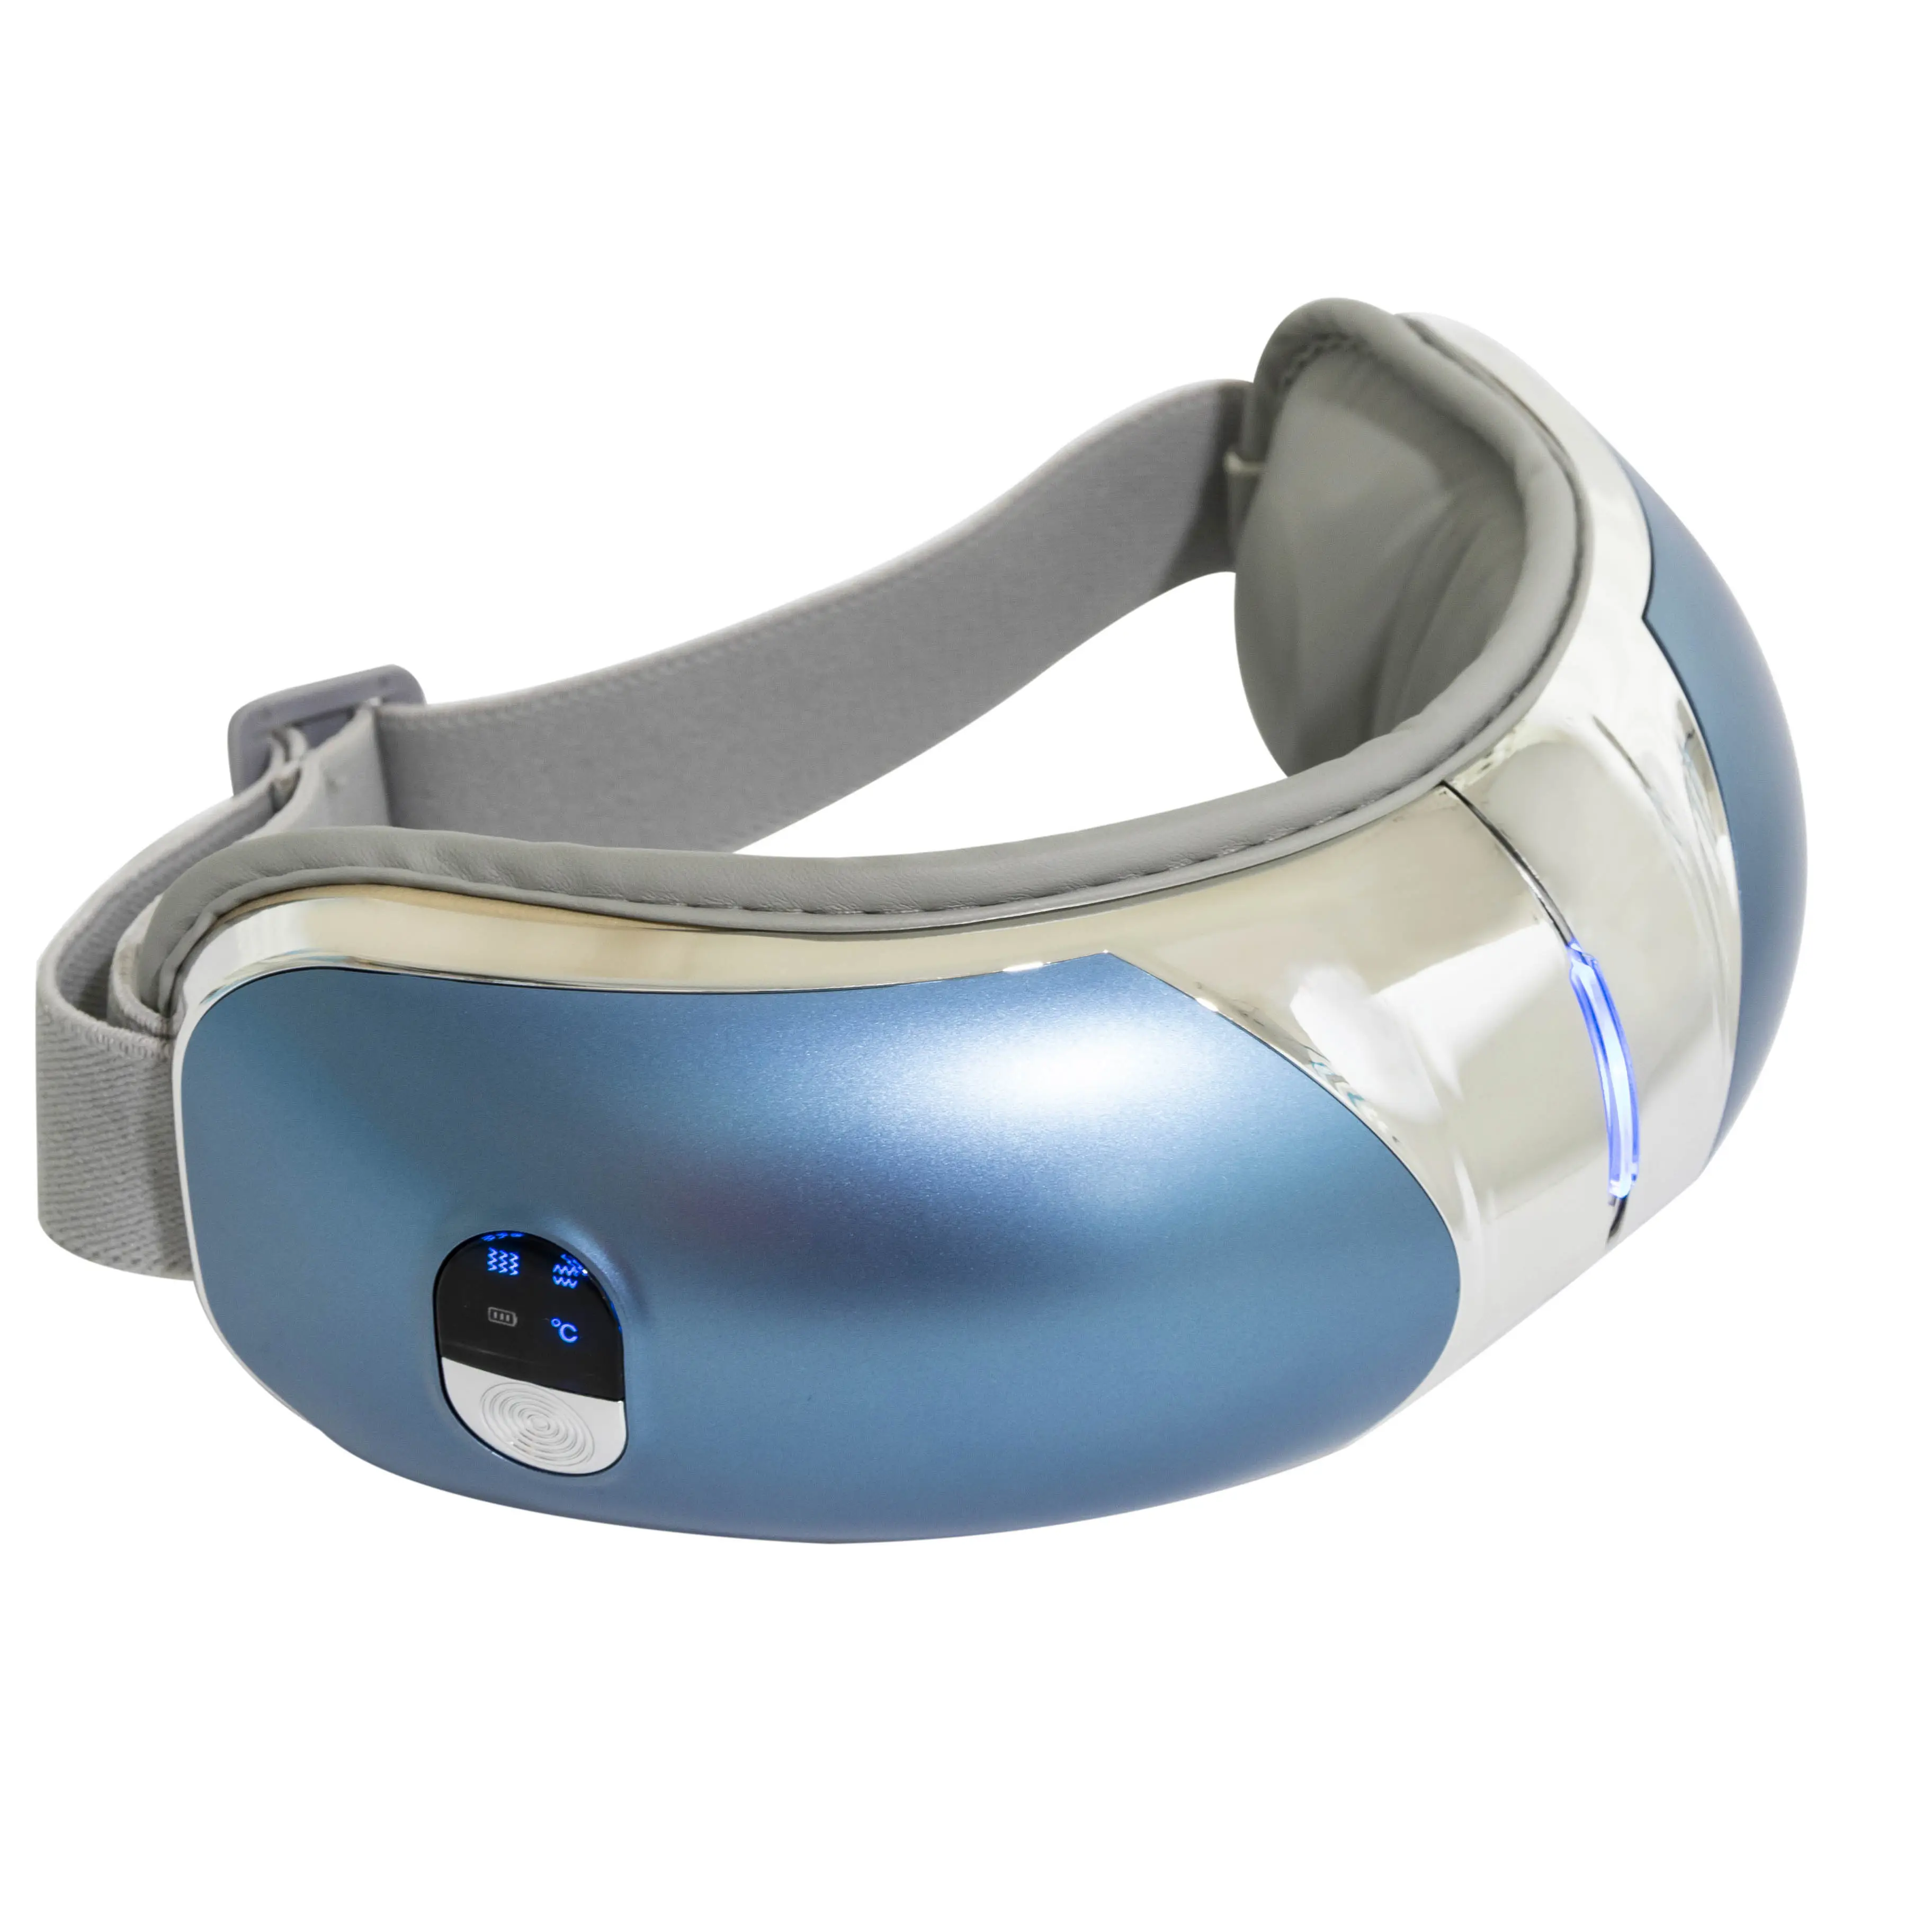 OEM Eye Health Care Vibration Eye Mask Massager Cordless Home Use Air Compress Eye Massager With Music